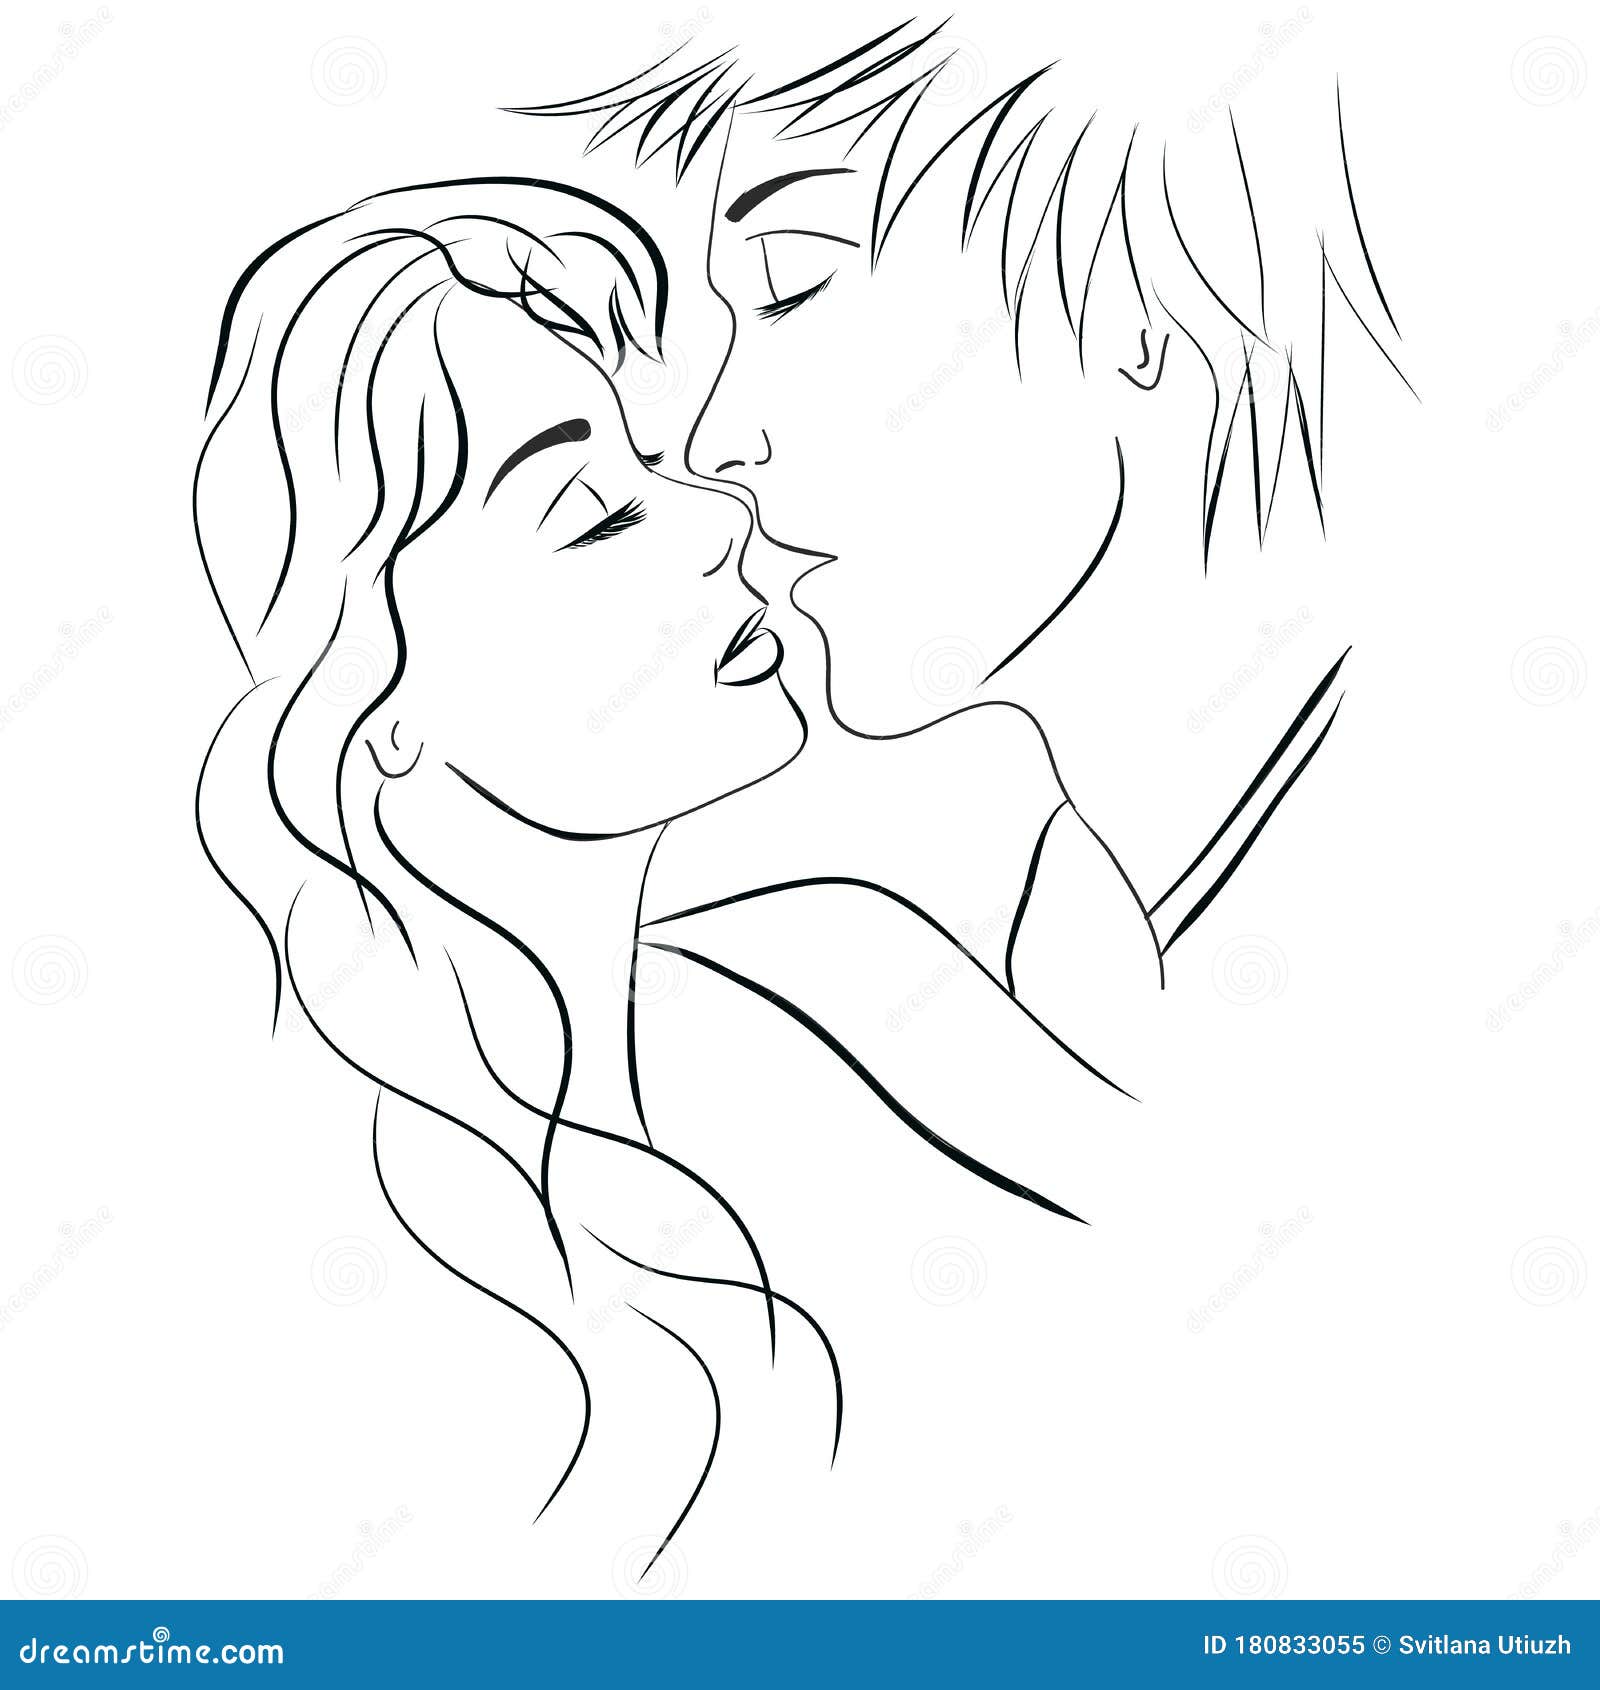 HOW TO DRAW Girl and Boy COUPLE By Art sketches  Romantic Couple Drawing   YouTube